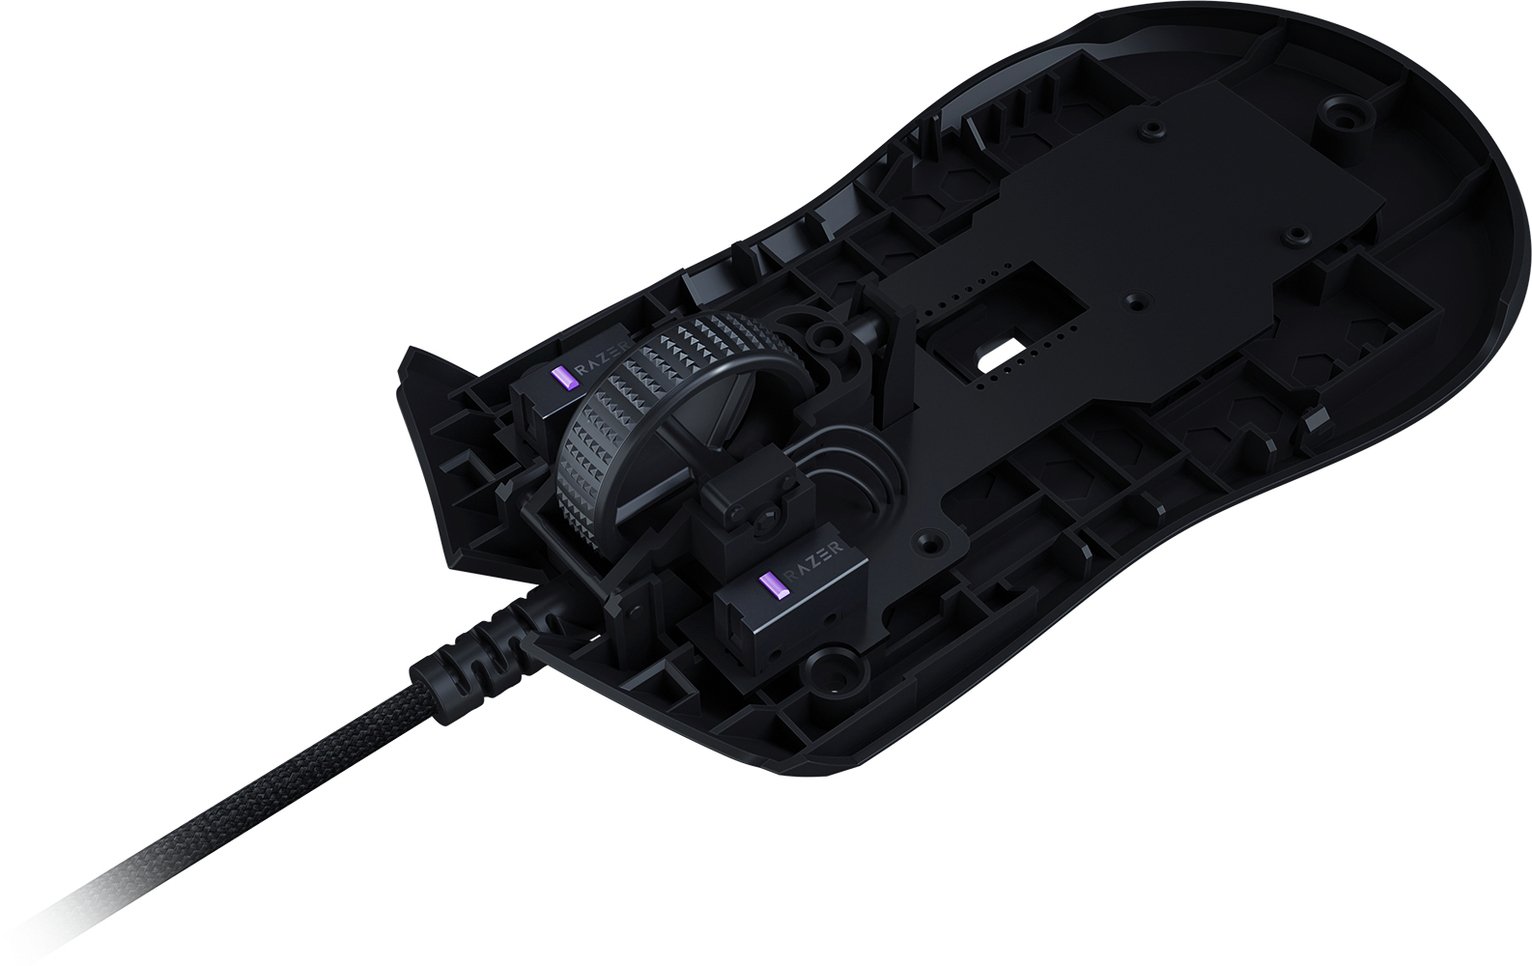 Razer Viper Ambidextrous Wired Gaming Mouse Review